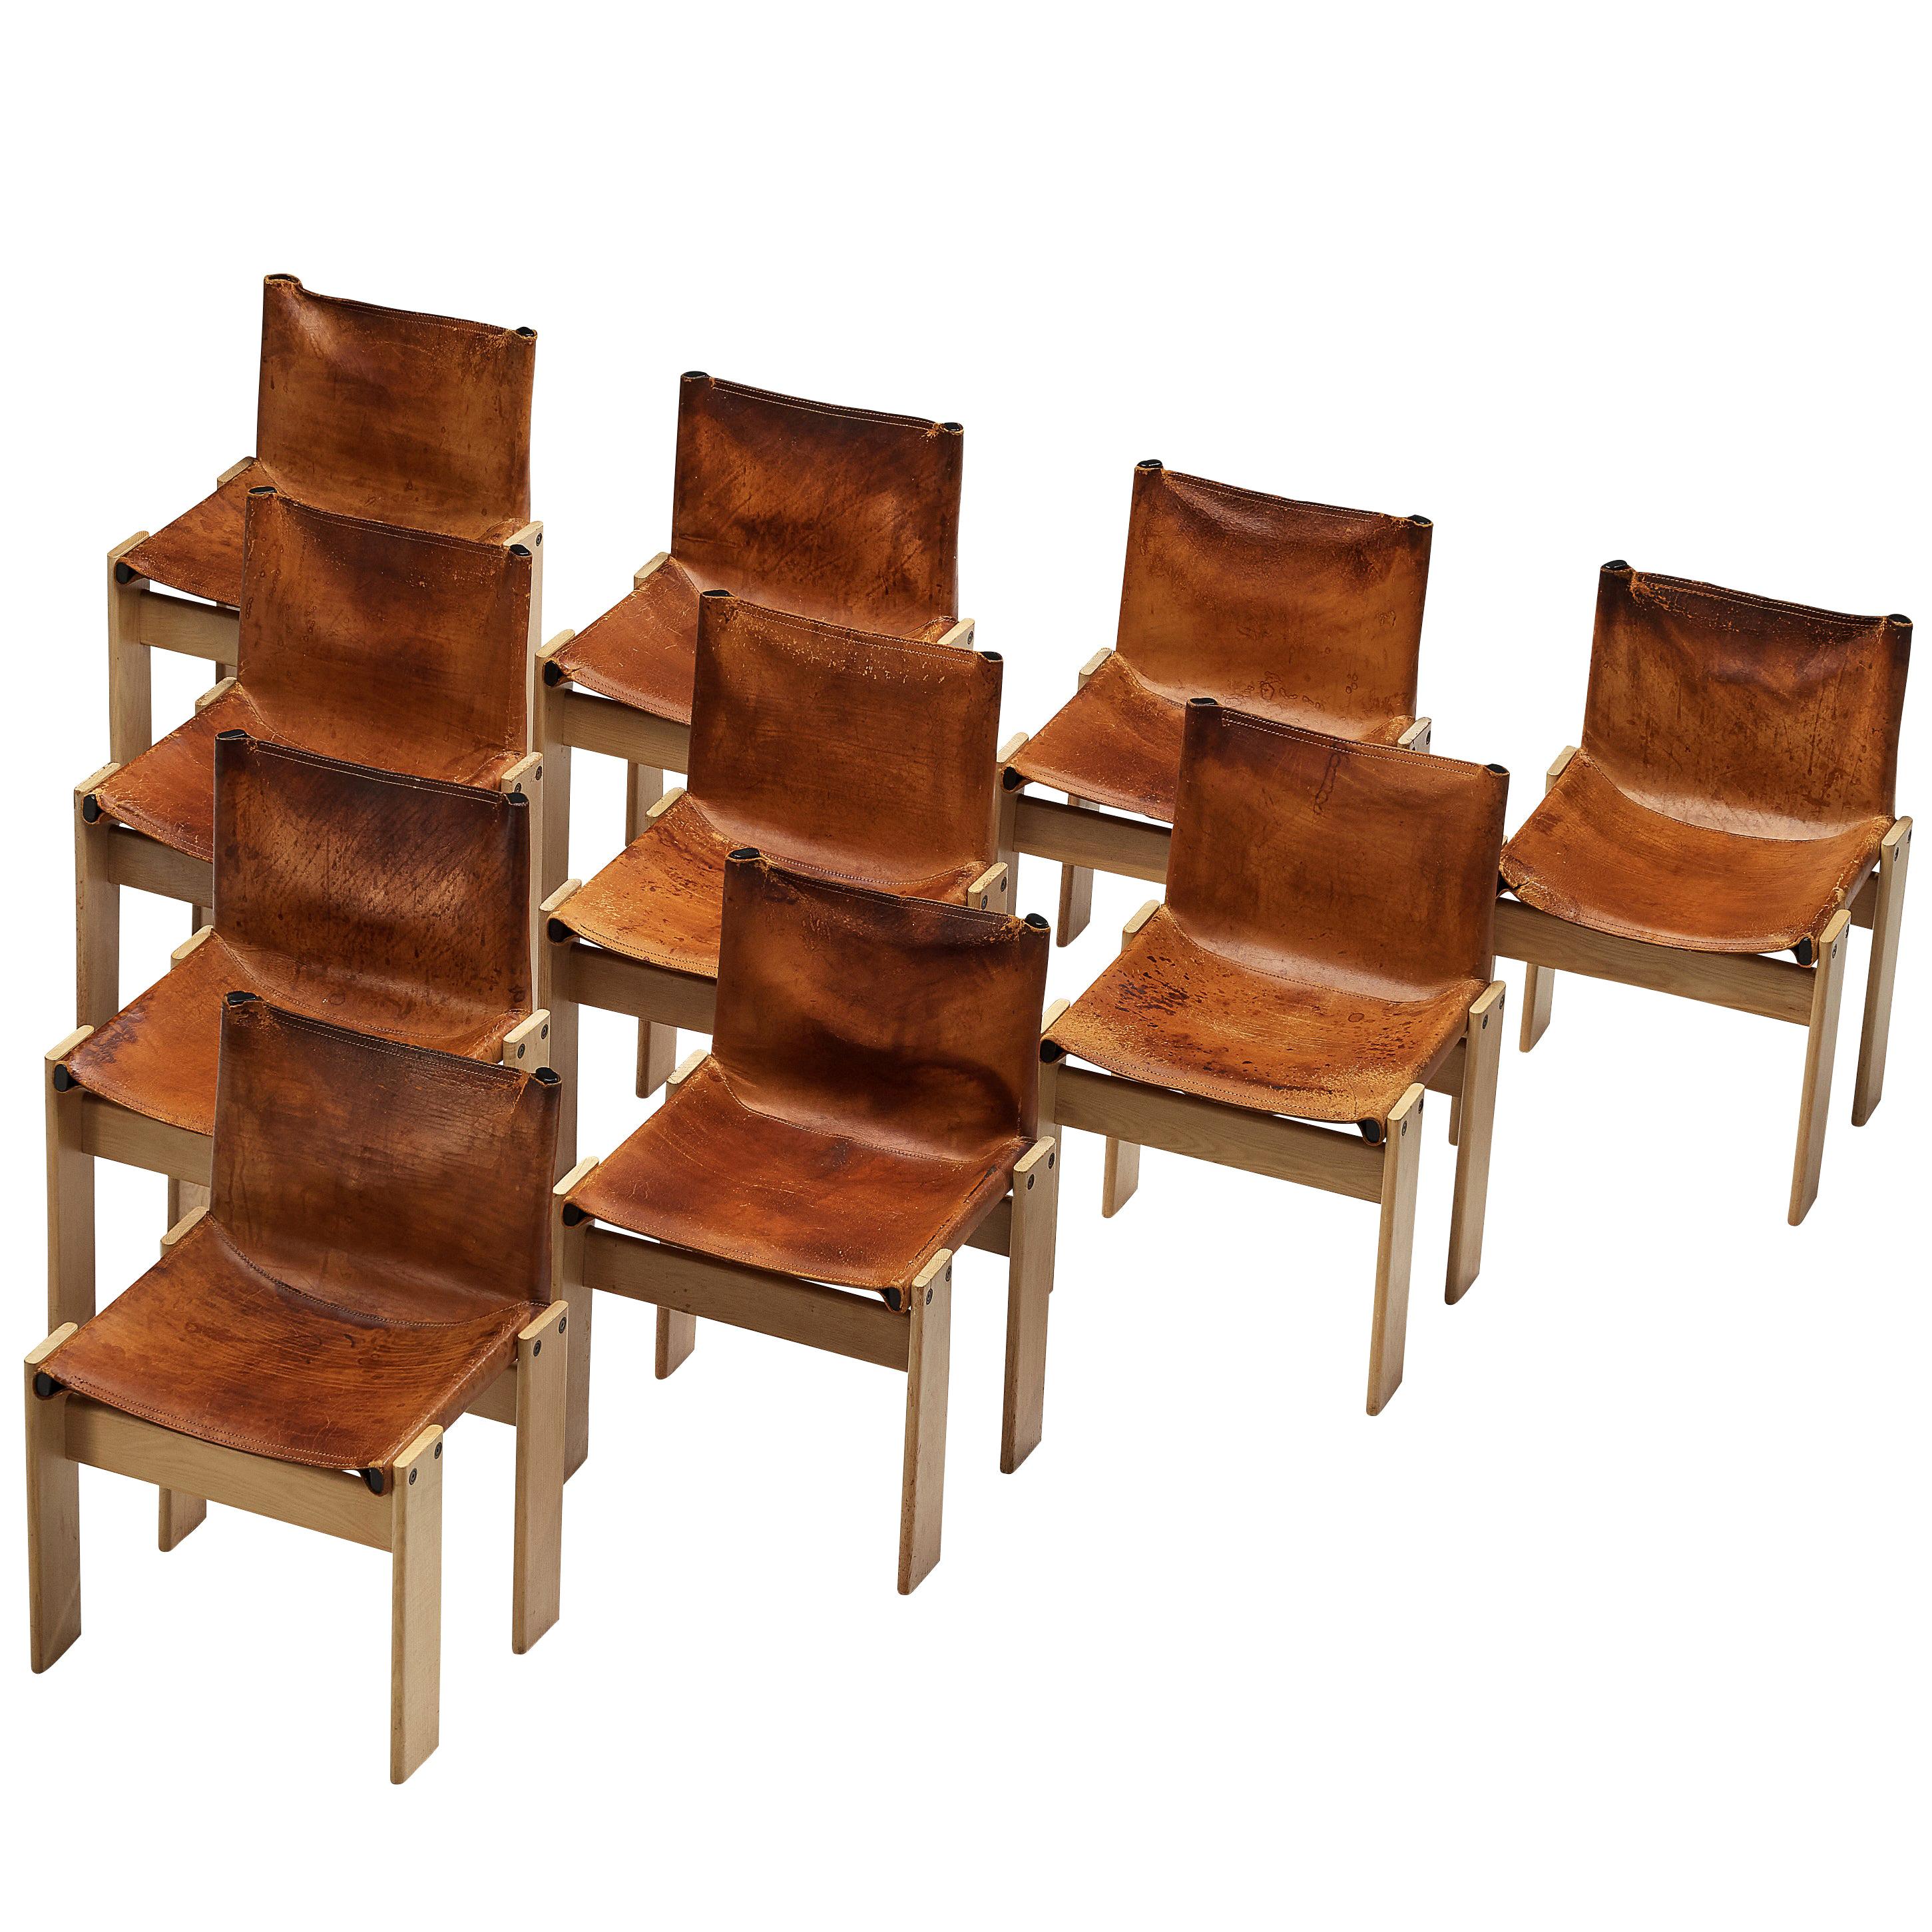 Afra & Tobia Scarpa for Molteni Set of 10 Monk Chairs in Cognac Leather